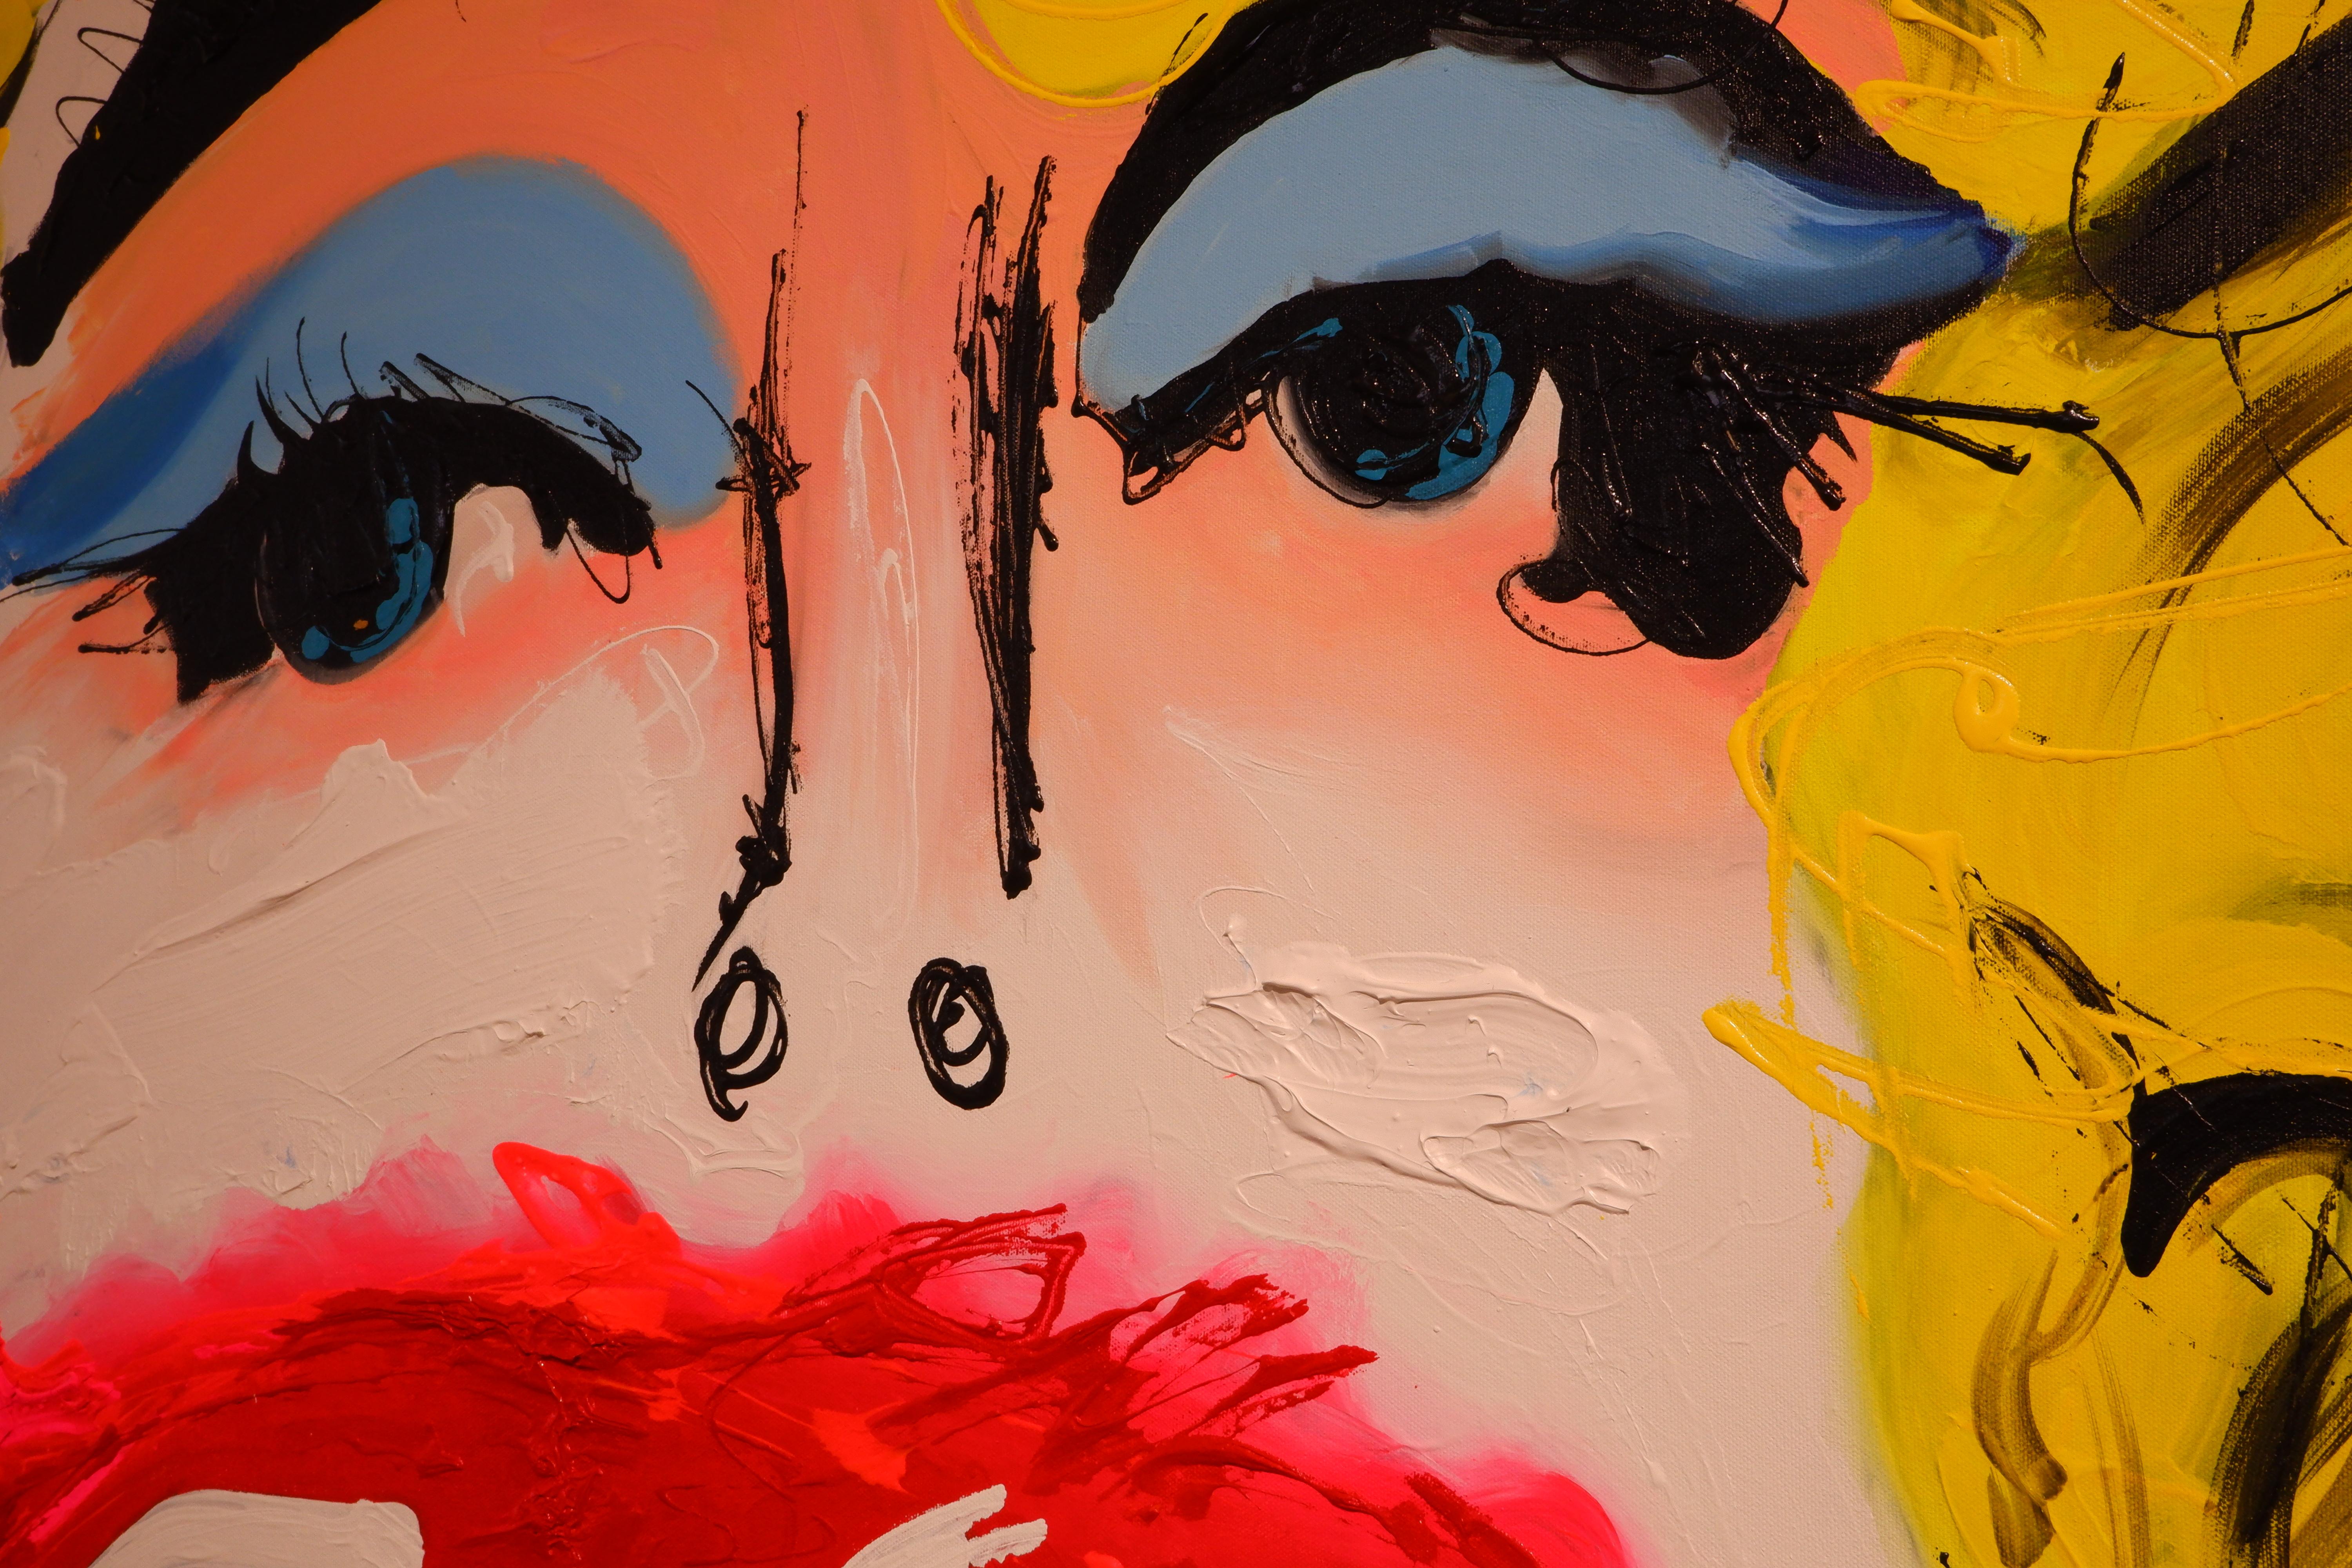 Taste Of Life - Painting by John Paul Fauves